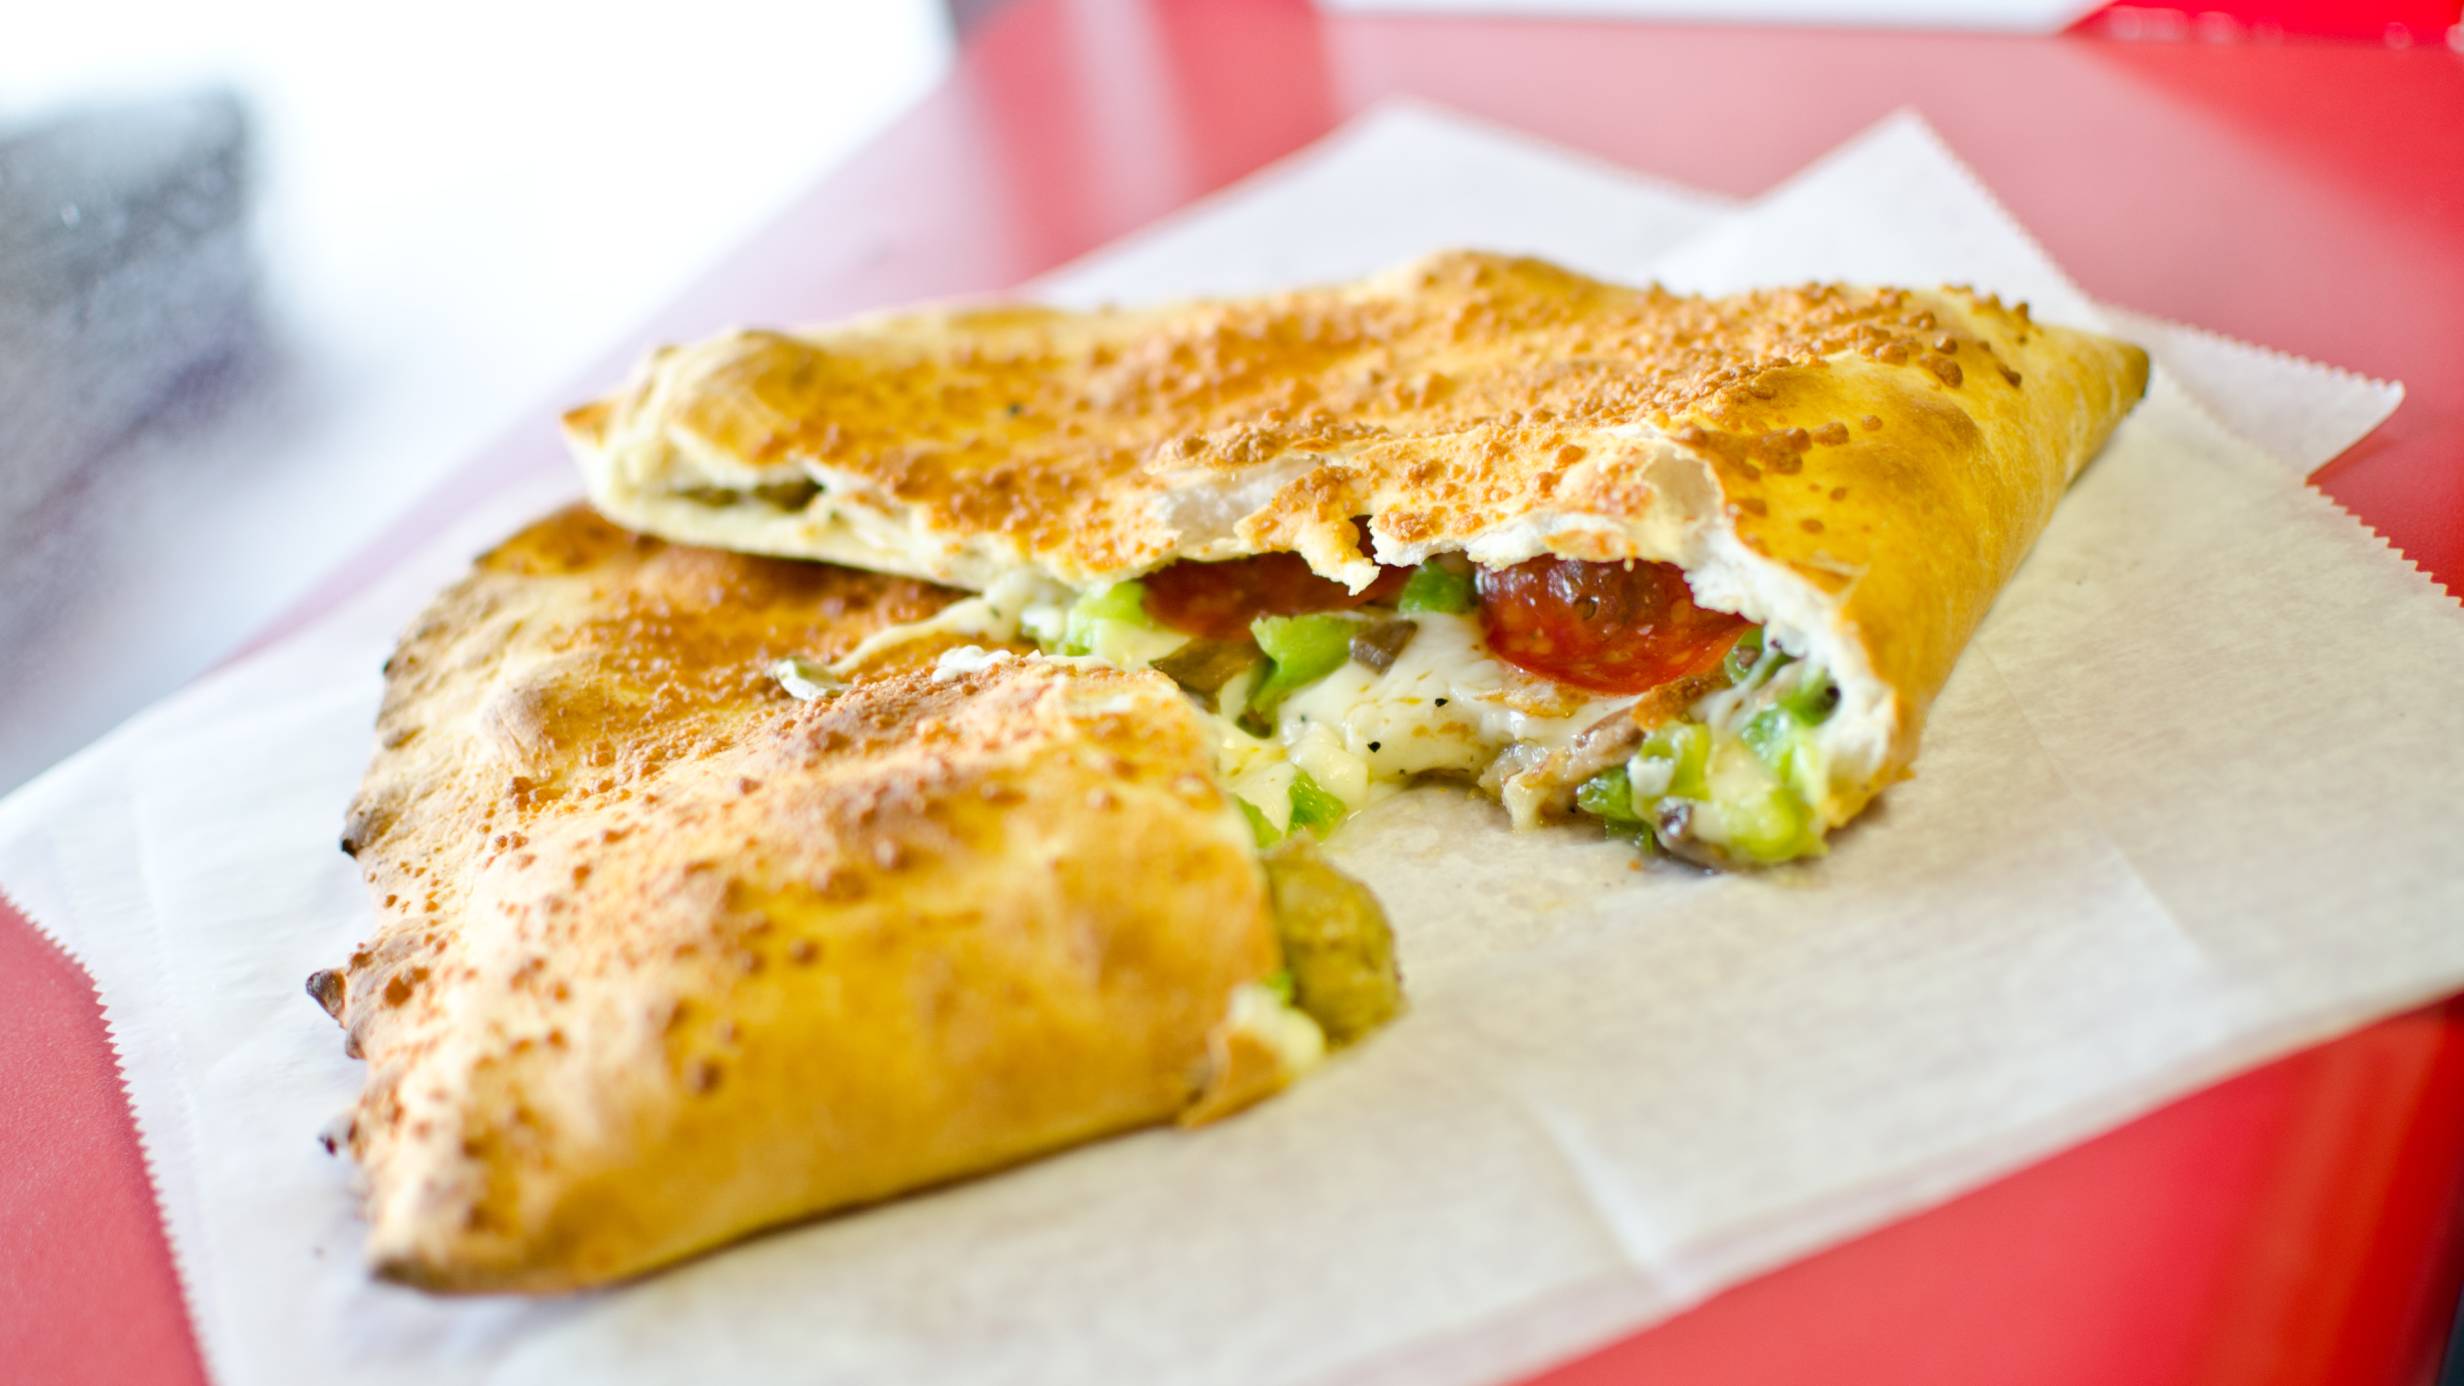 Who doesn’t love calzones from D.P. Dough?